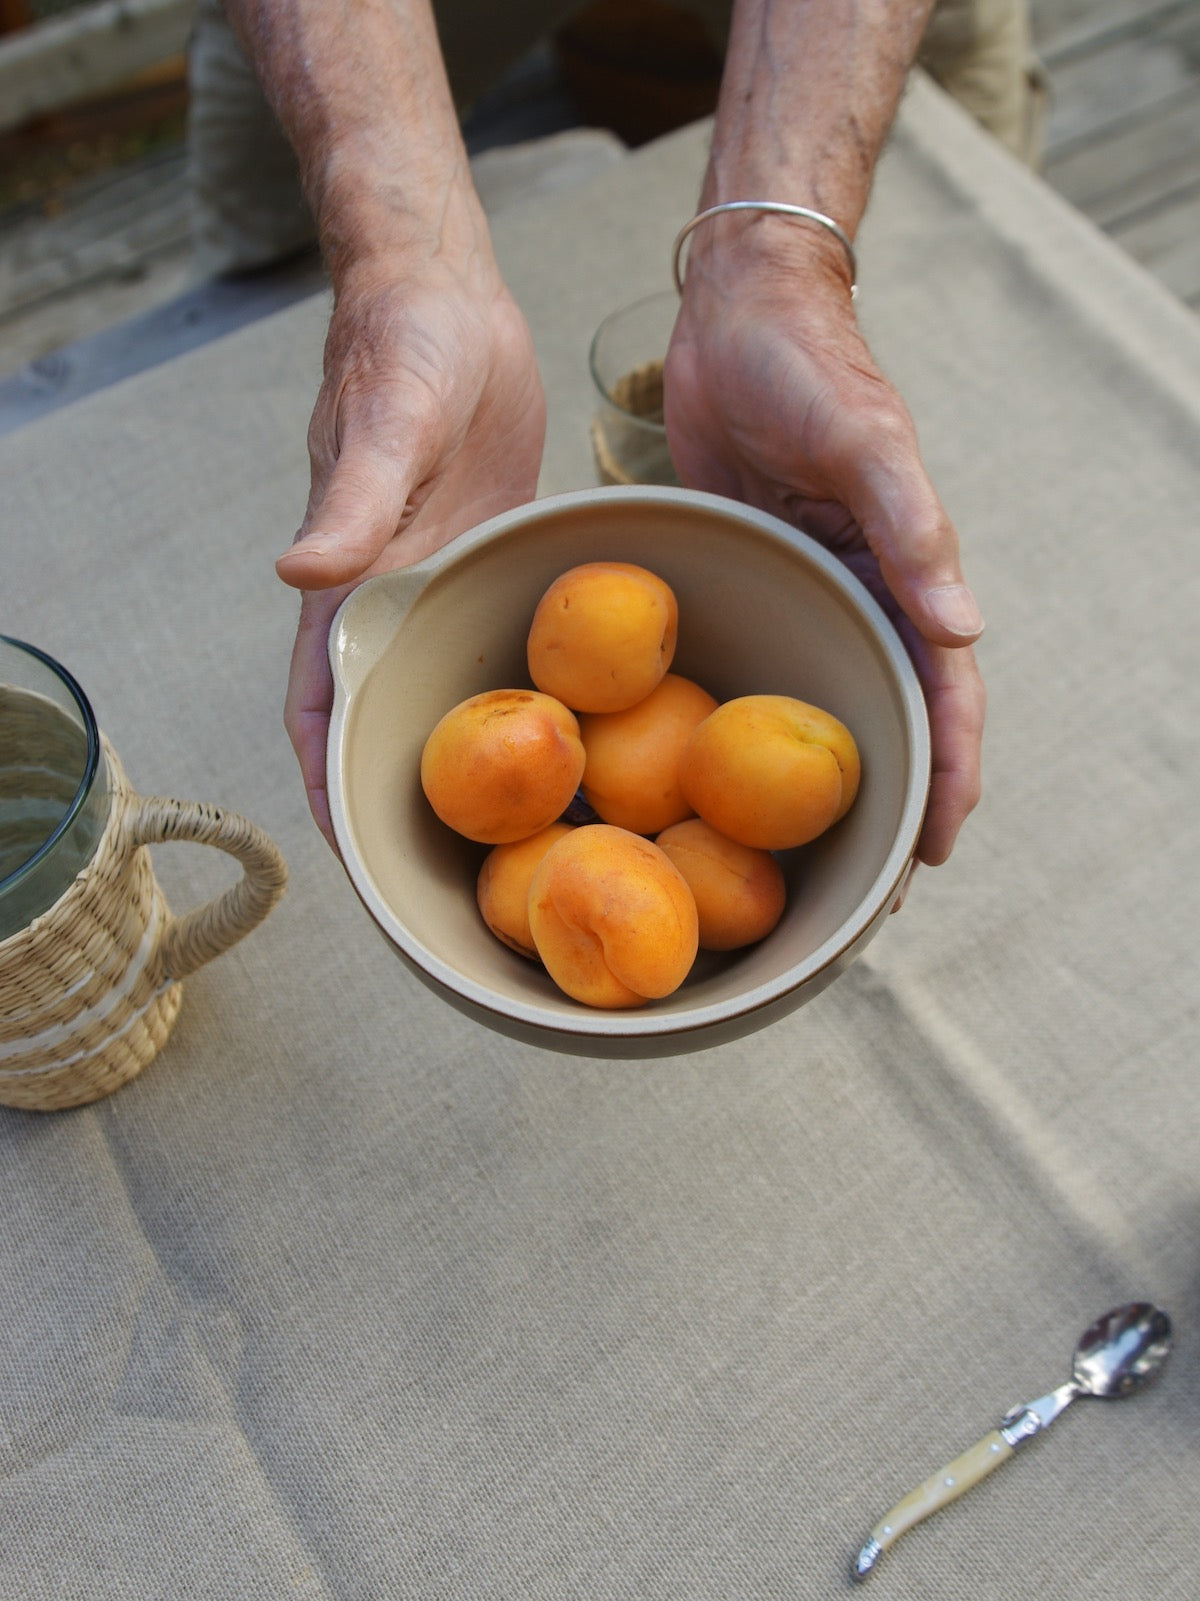 Hands holding bowl with pour spout full of orang fruit. Table covered with linen table cloth with seagrass pitcher and cream coffee spoon on table.